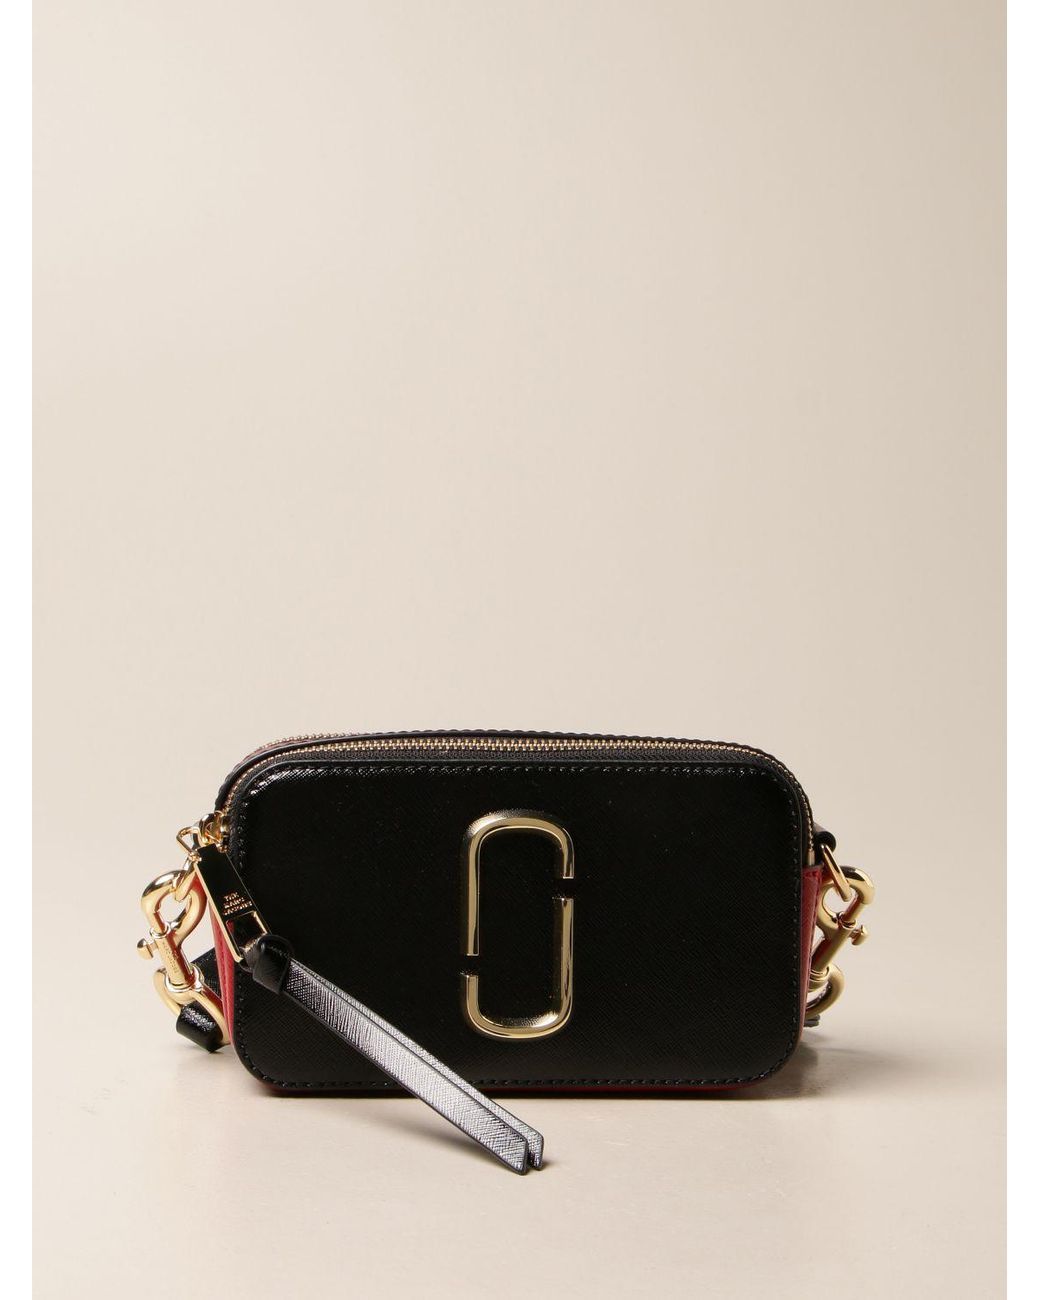 Marc Jacobs Leather Crossbody Bags in Black - Lyst